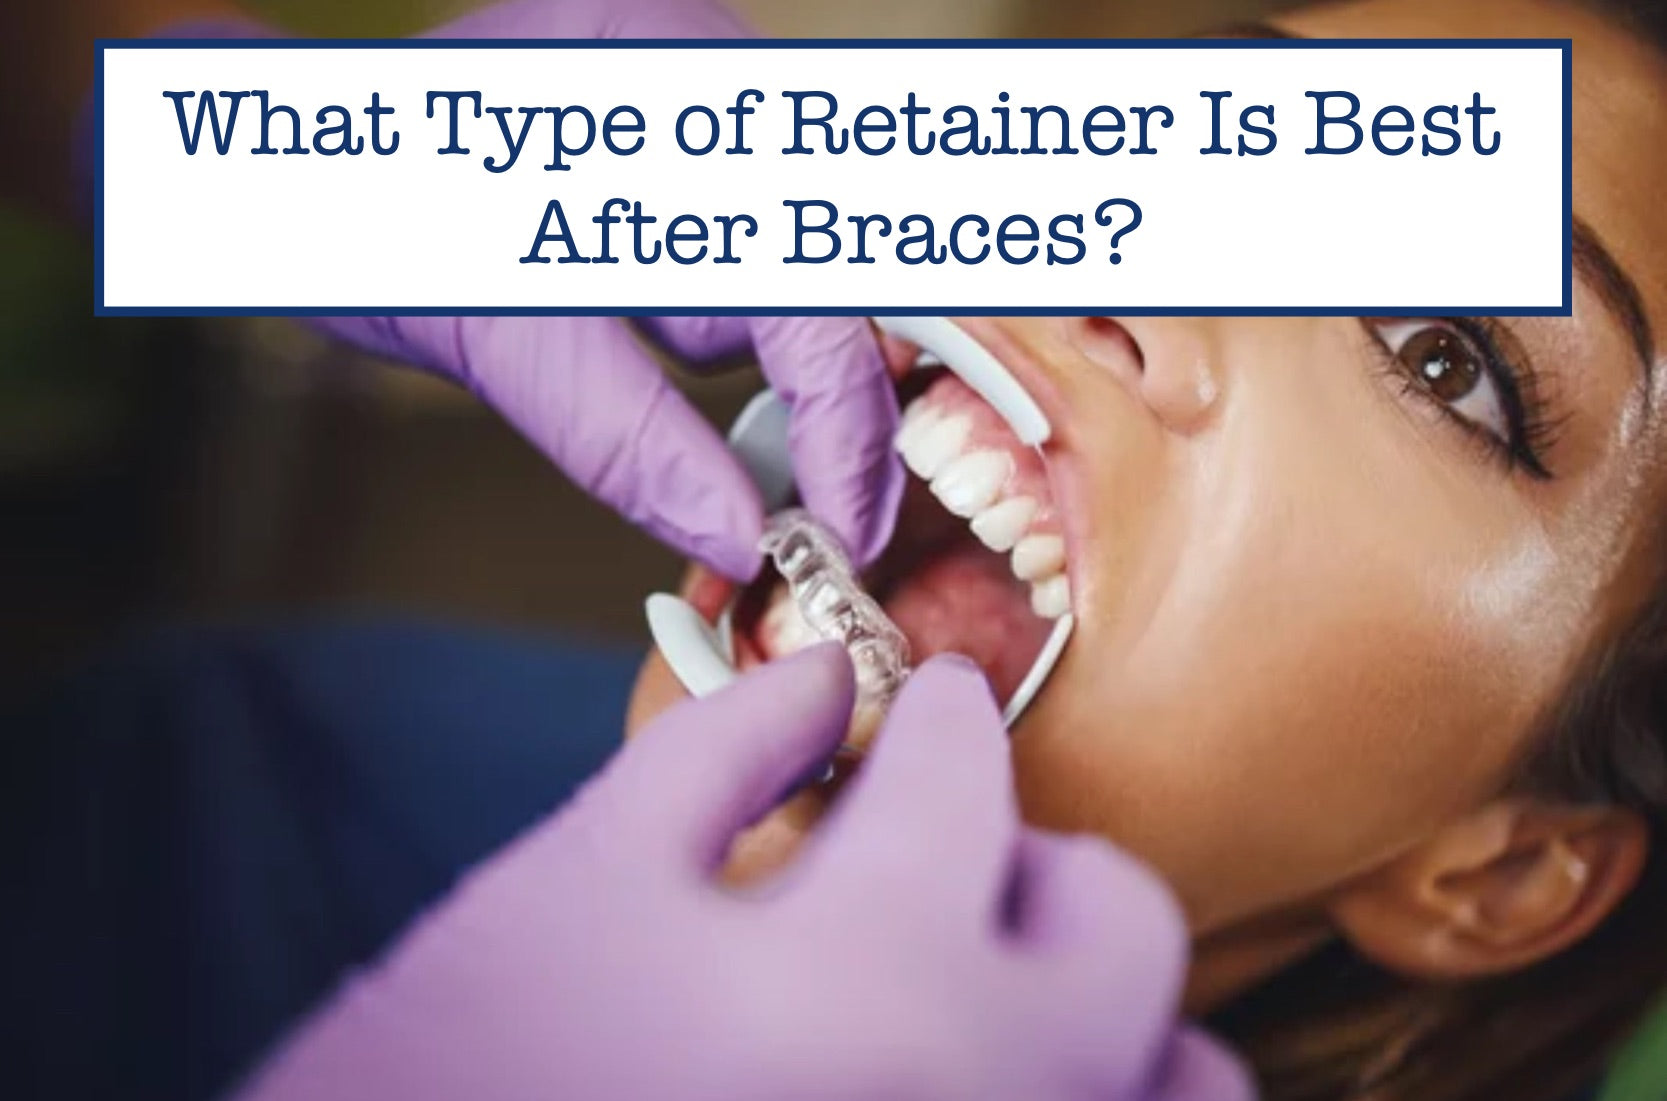 What Type of Retainer Is Best After Braces?